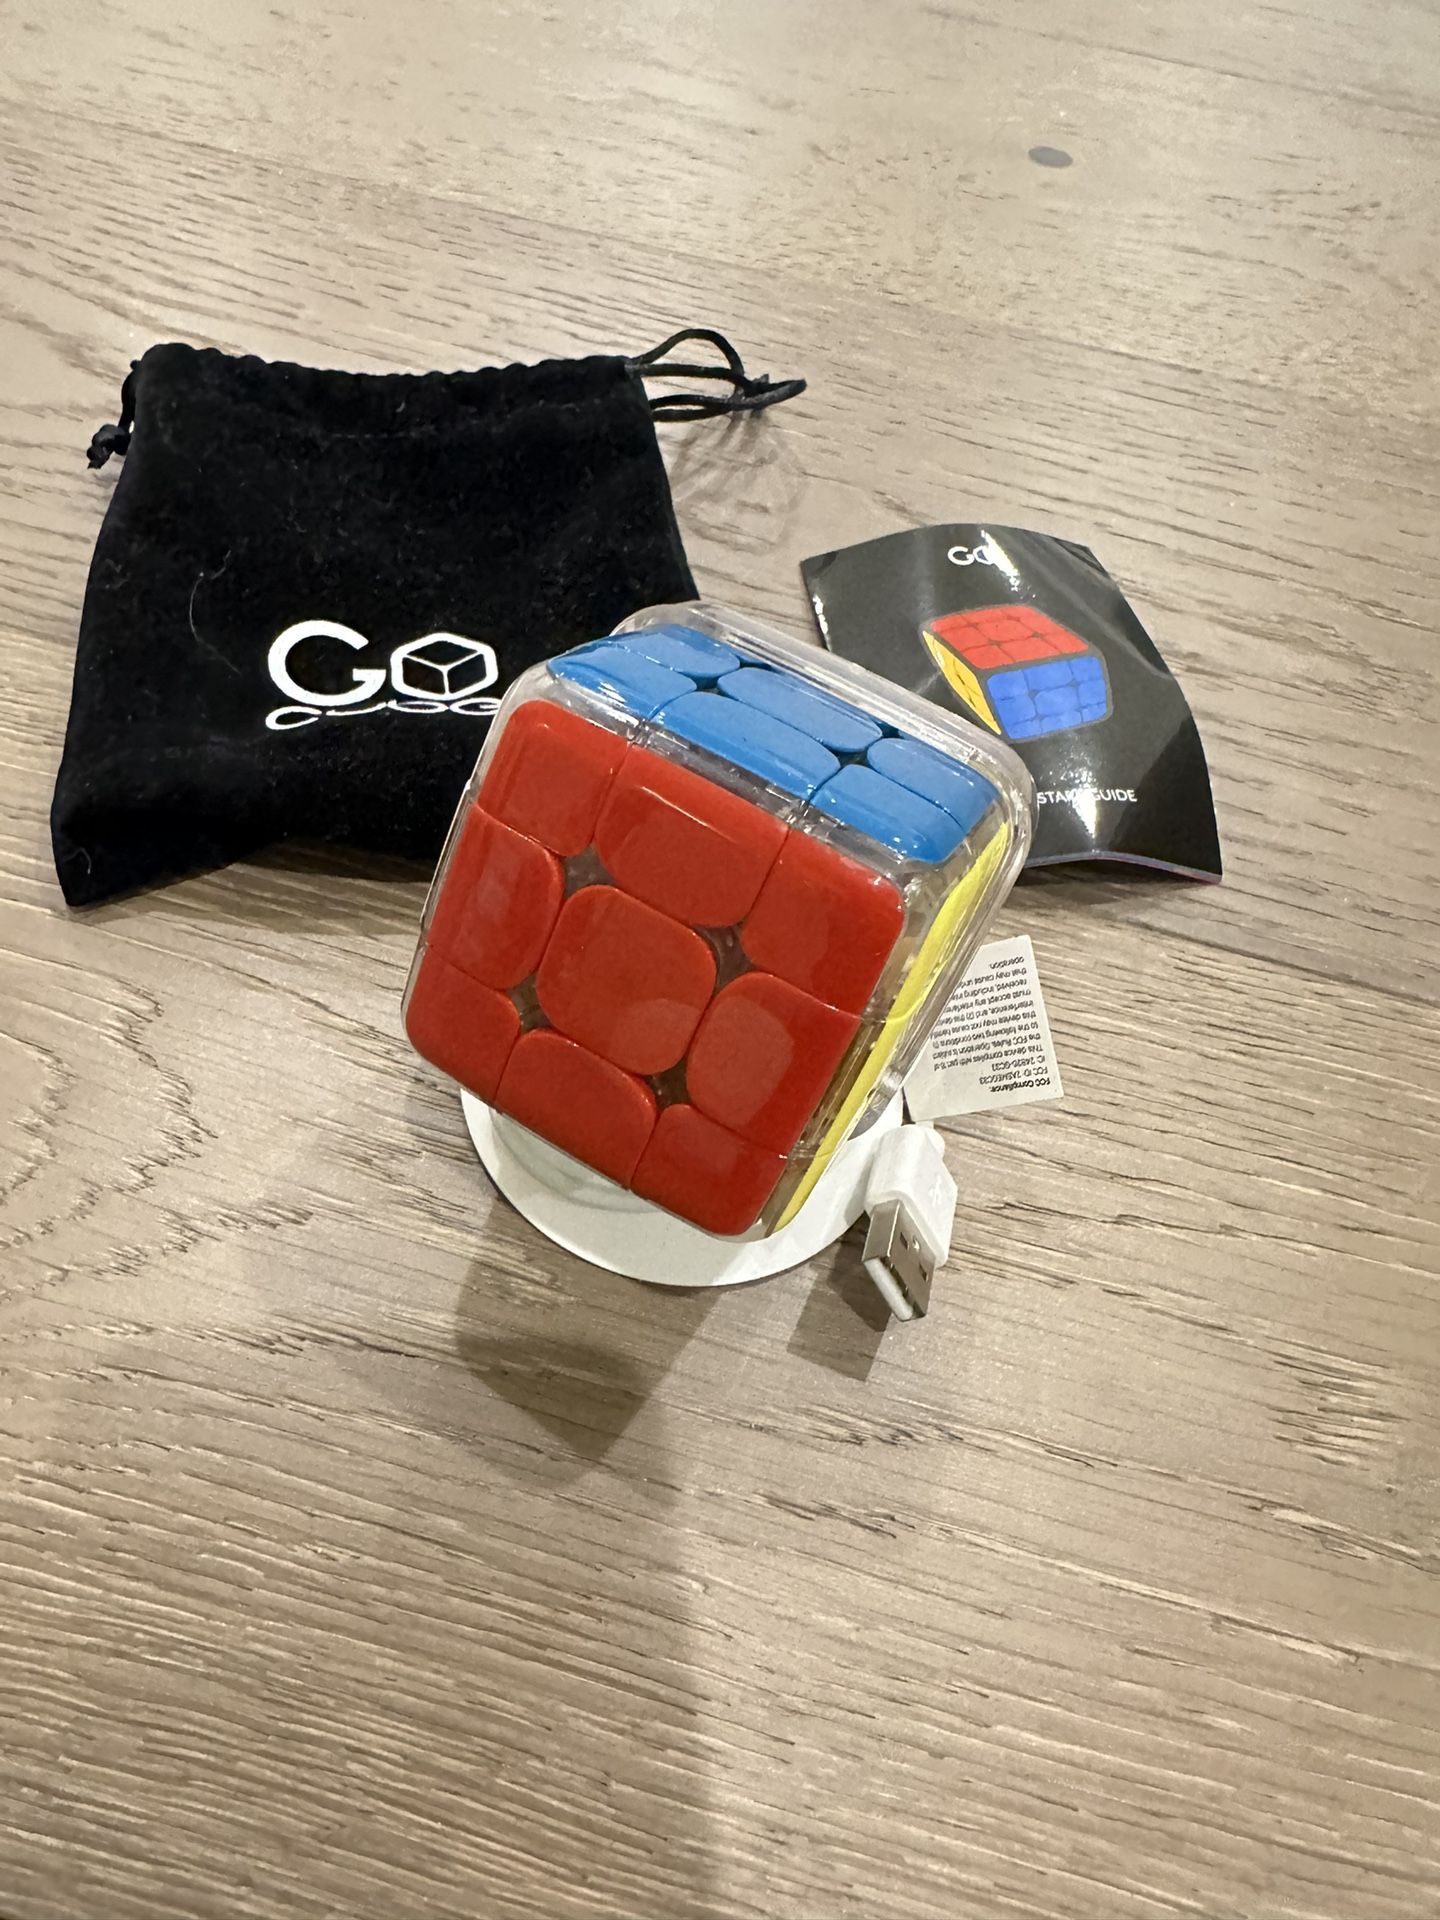 GoCube Edge Full Pack - The Connected Electronic Bluetooth Cube - 3x3 Stickerless Magnetic Speed Cube 